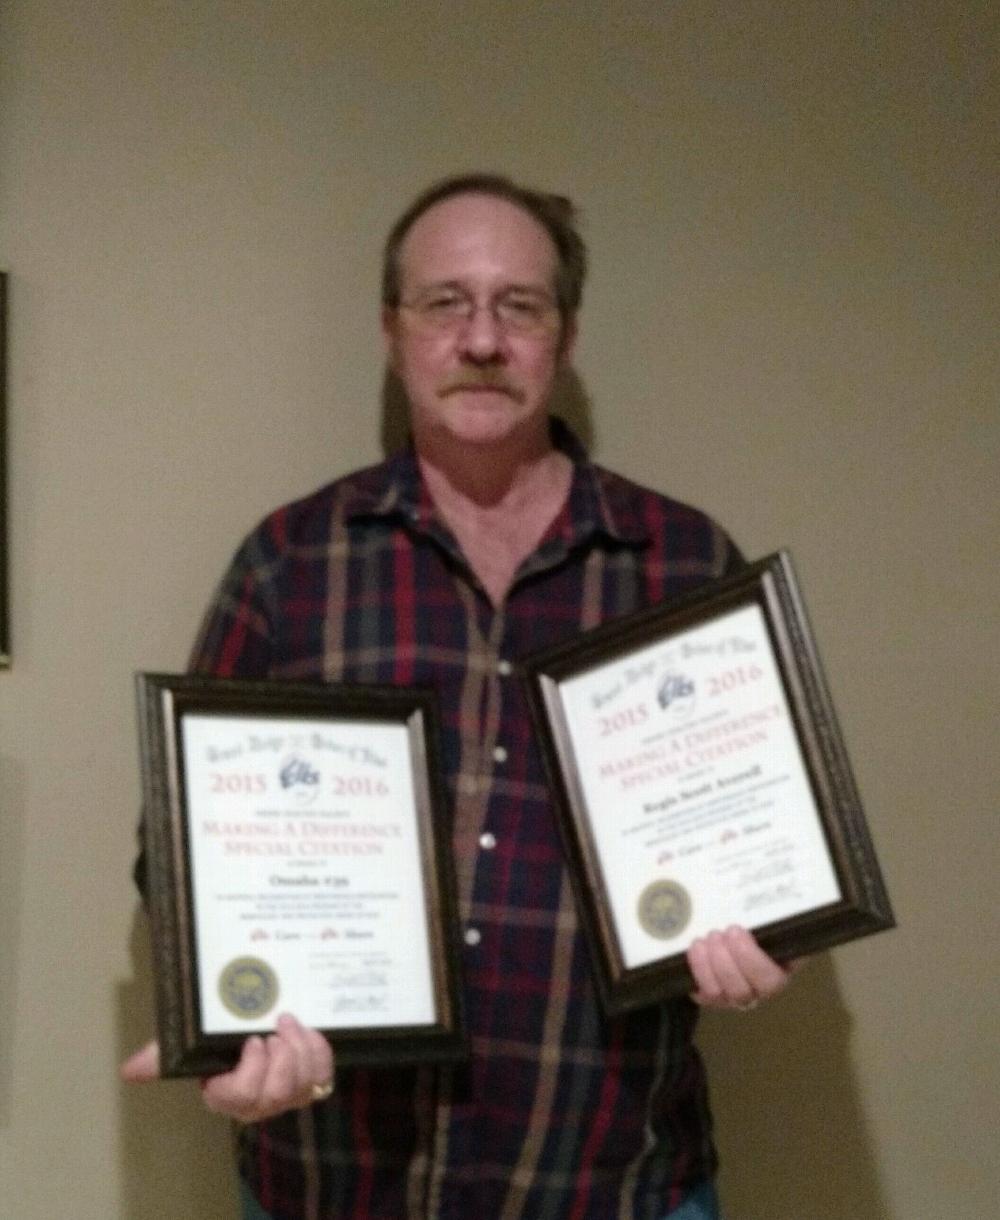 Scott Averell Making a difference special Citation Award one for him and one for the Elks Lodge